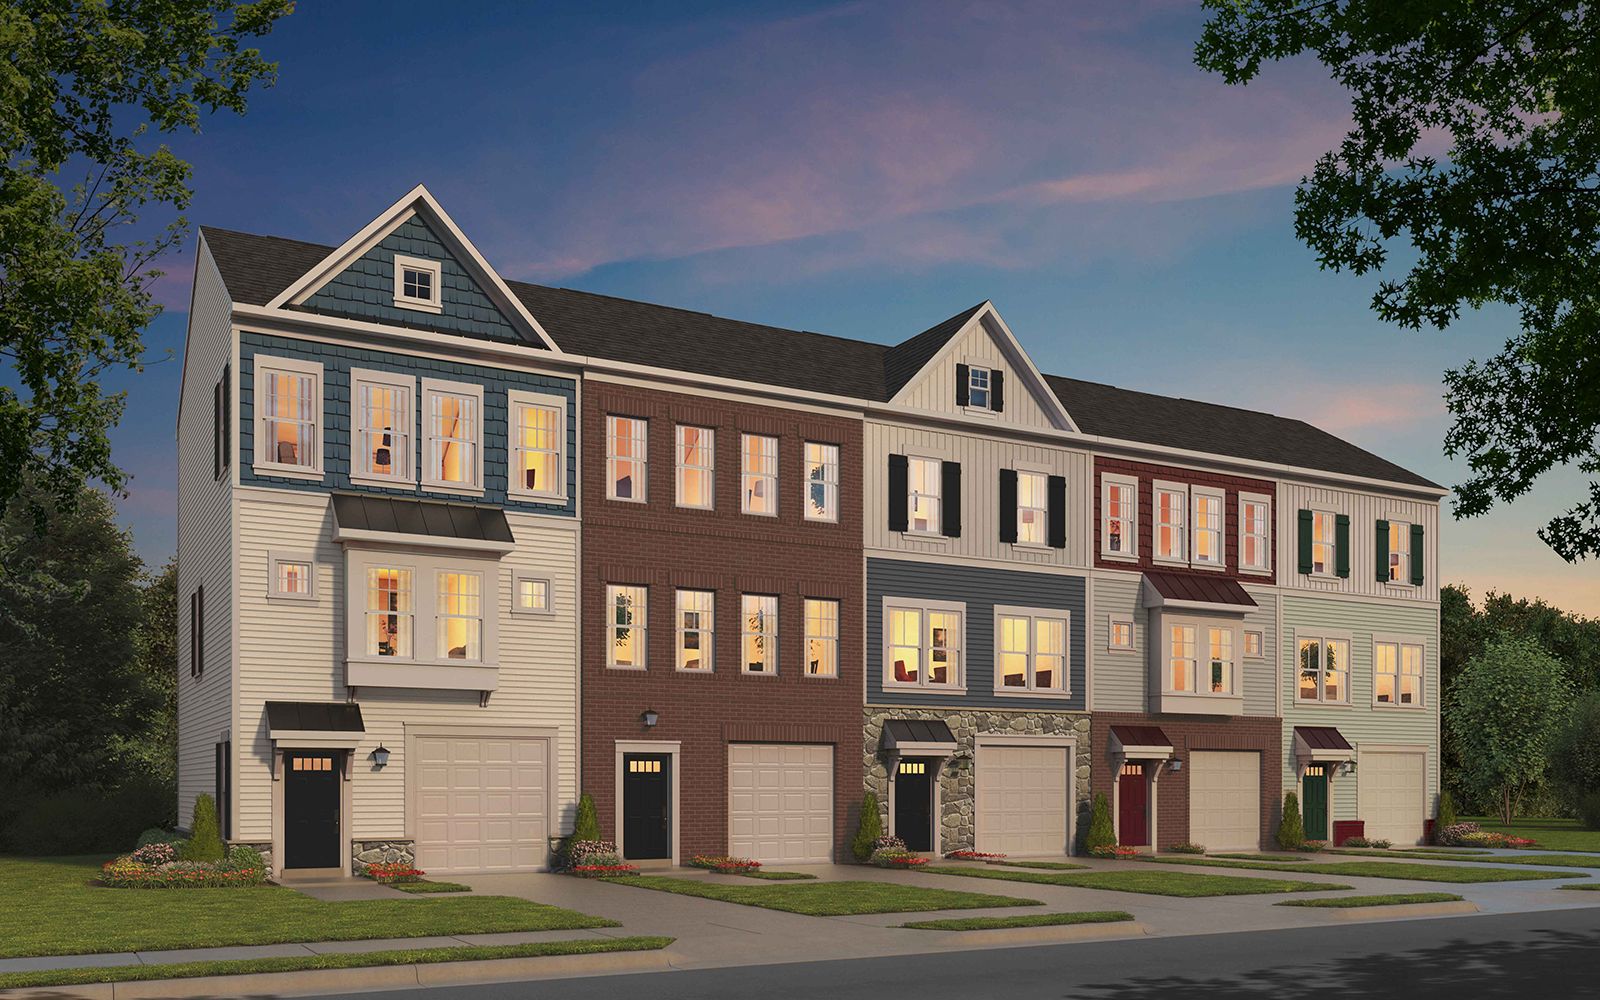 Skyline Elevation:An exterior rendering of the Skyline townhome at Snowden Bridge by Brookfield Residential.